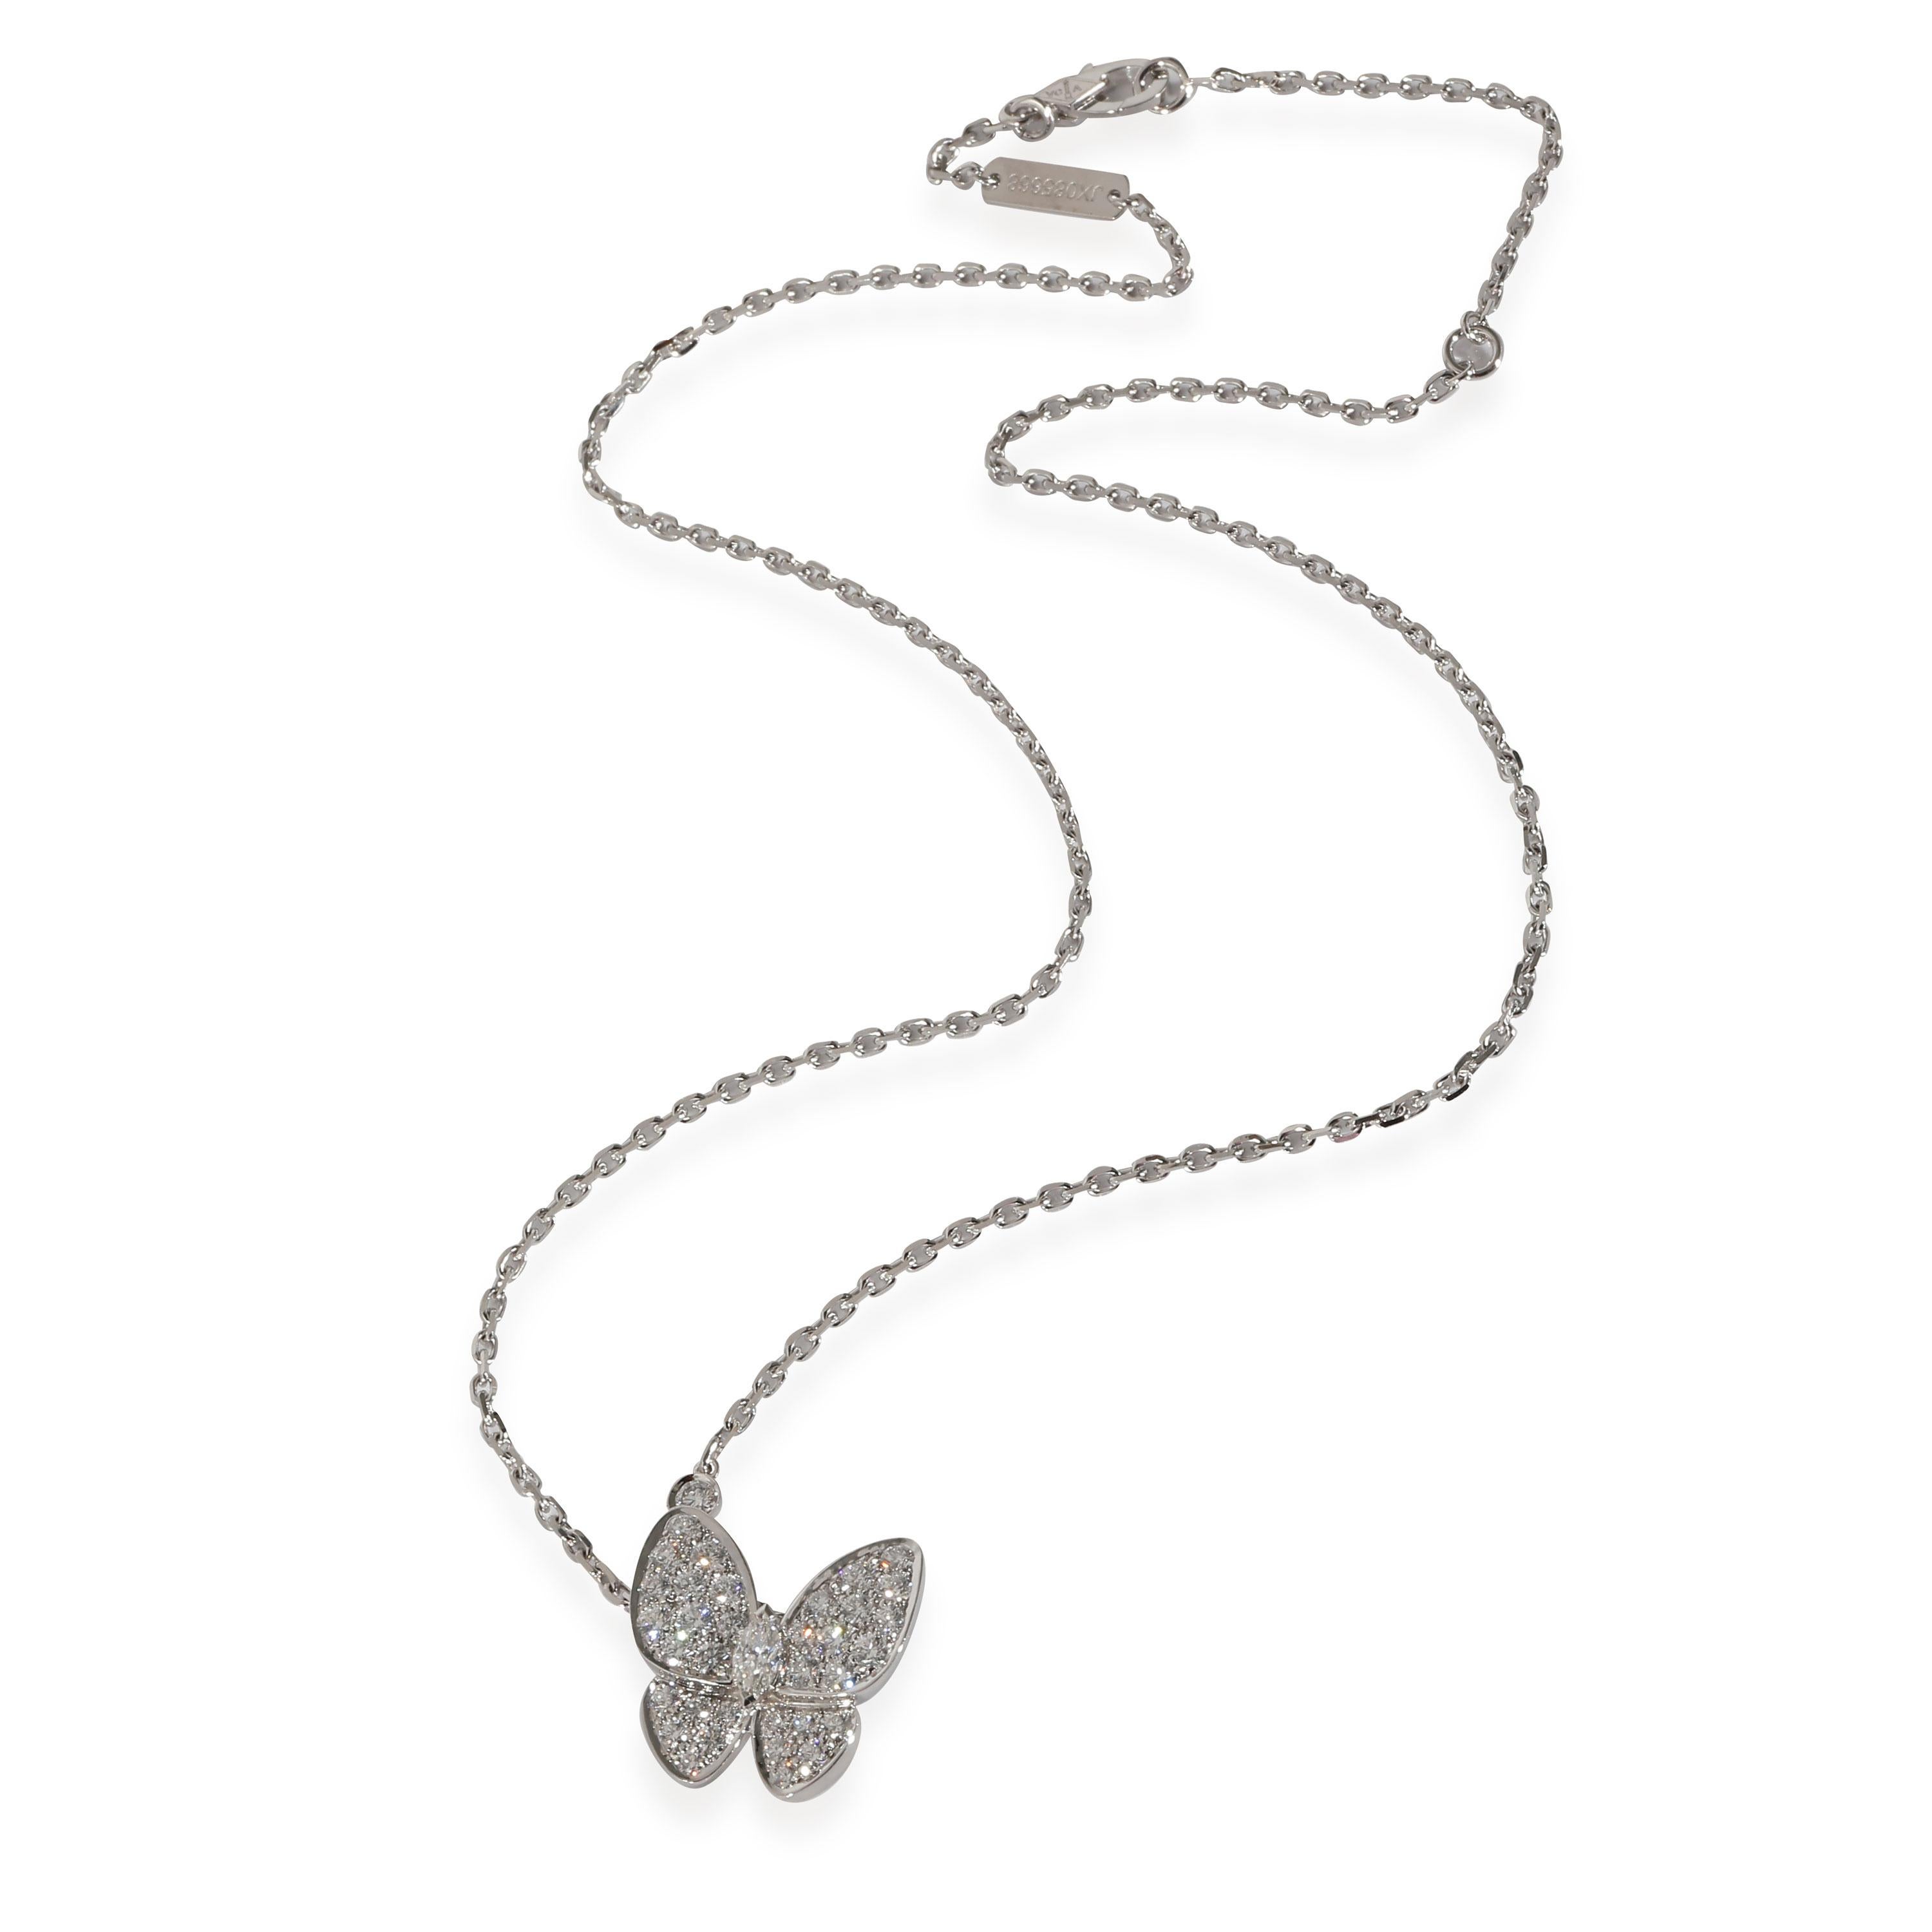 Van Cleef & Arpels Two Butterfly Diamond Pendant in 18k White Gold 0.88 CTW

PRIMARY DETAILS
SKU: 136301
Listing Title: Van Cleef & Arpels Two Butterfly Diamond Pendant in 18k White Gold 0.88 CTW
Condition Description: Retails for 16300 USD. In